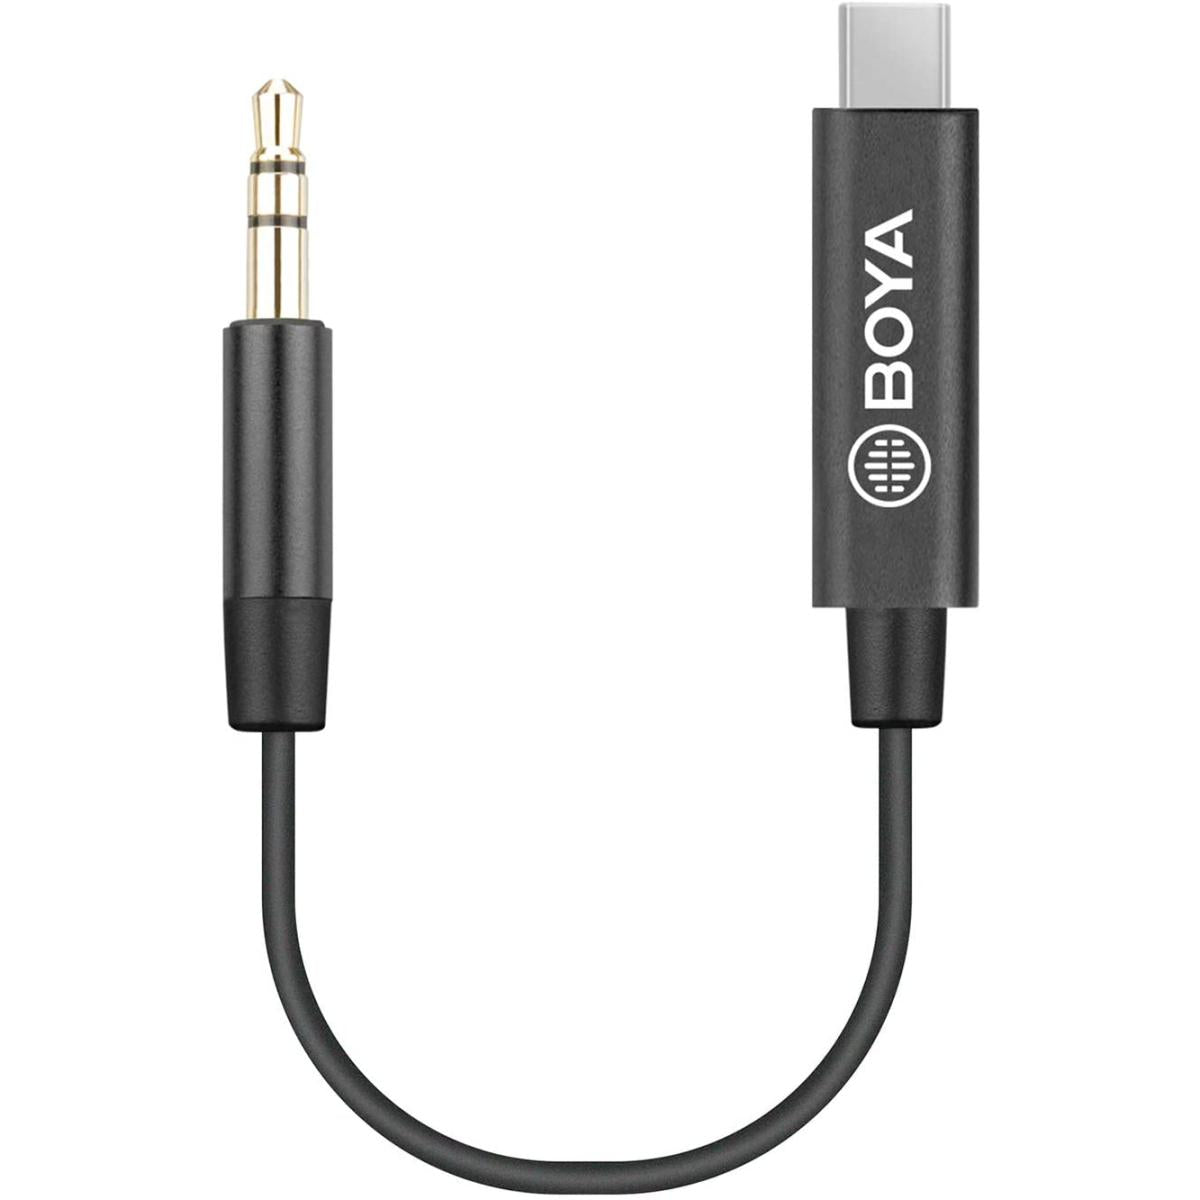 BOYA 3.5mm TRS Male to Type-C Male Audio Adapter Cable (7.8in) - Black